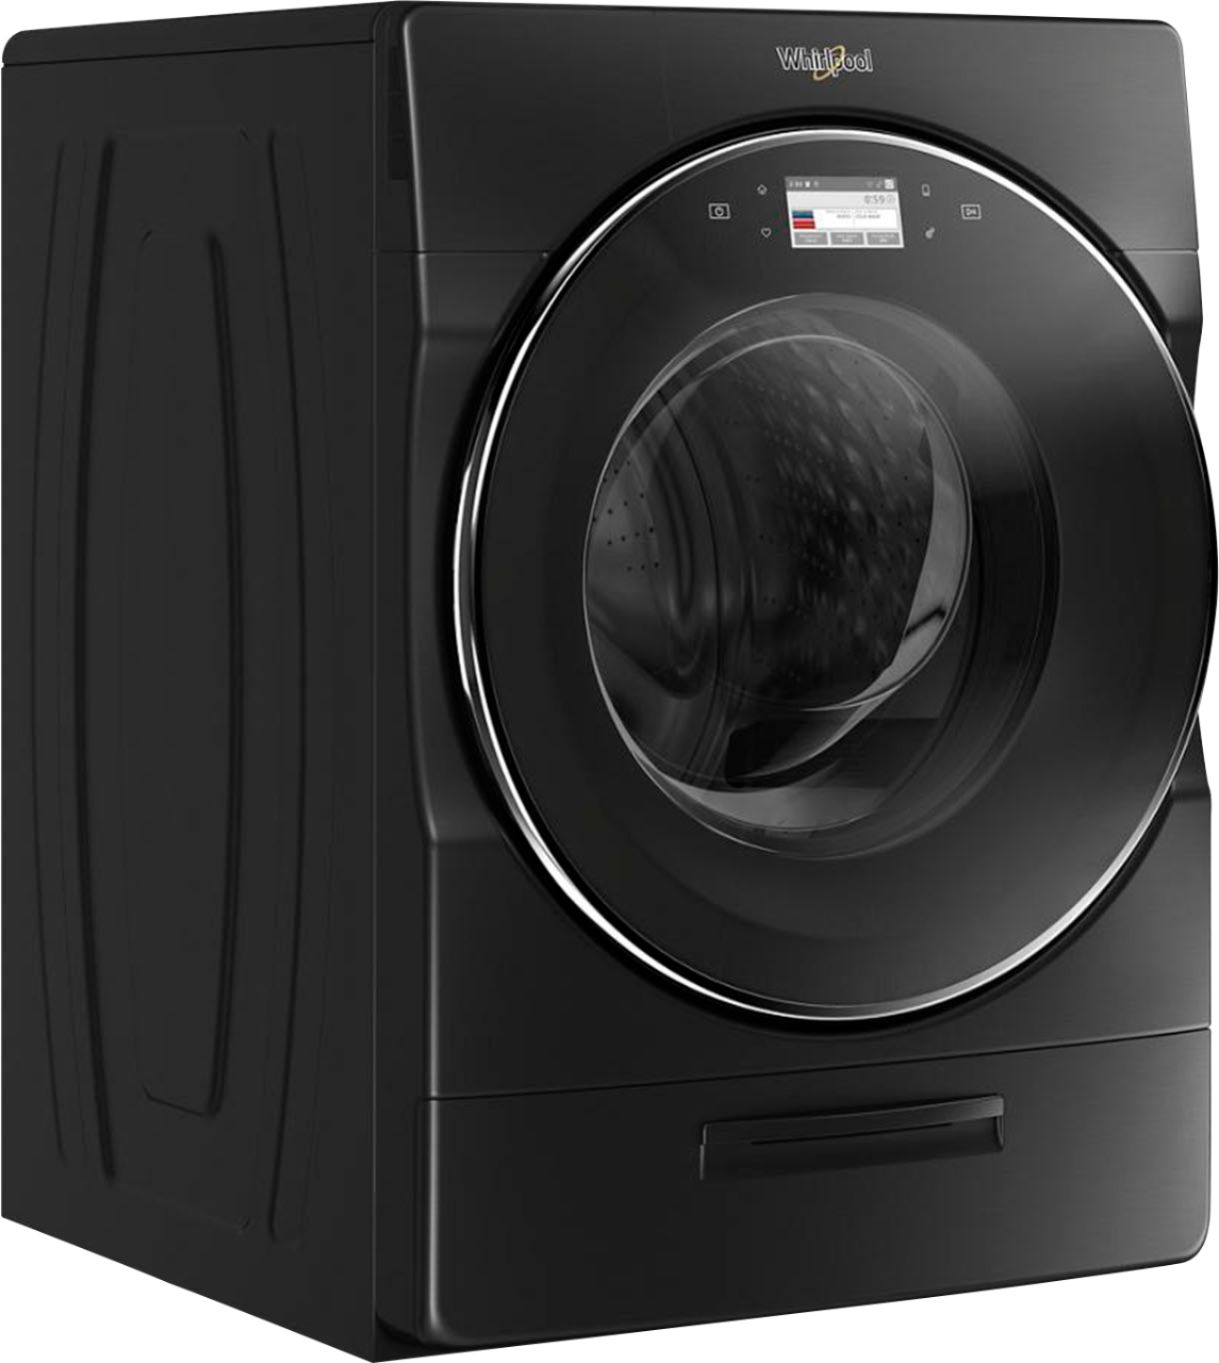 Angle View: Whirlpool - 5.0 Cu. Ft. High Efficiency Stackable Smart Front Load Washer with Steam and Load & Go XL Dispenser - Black shadow